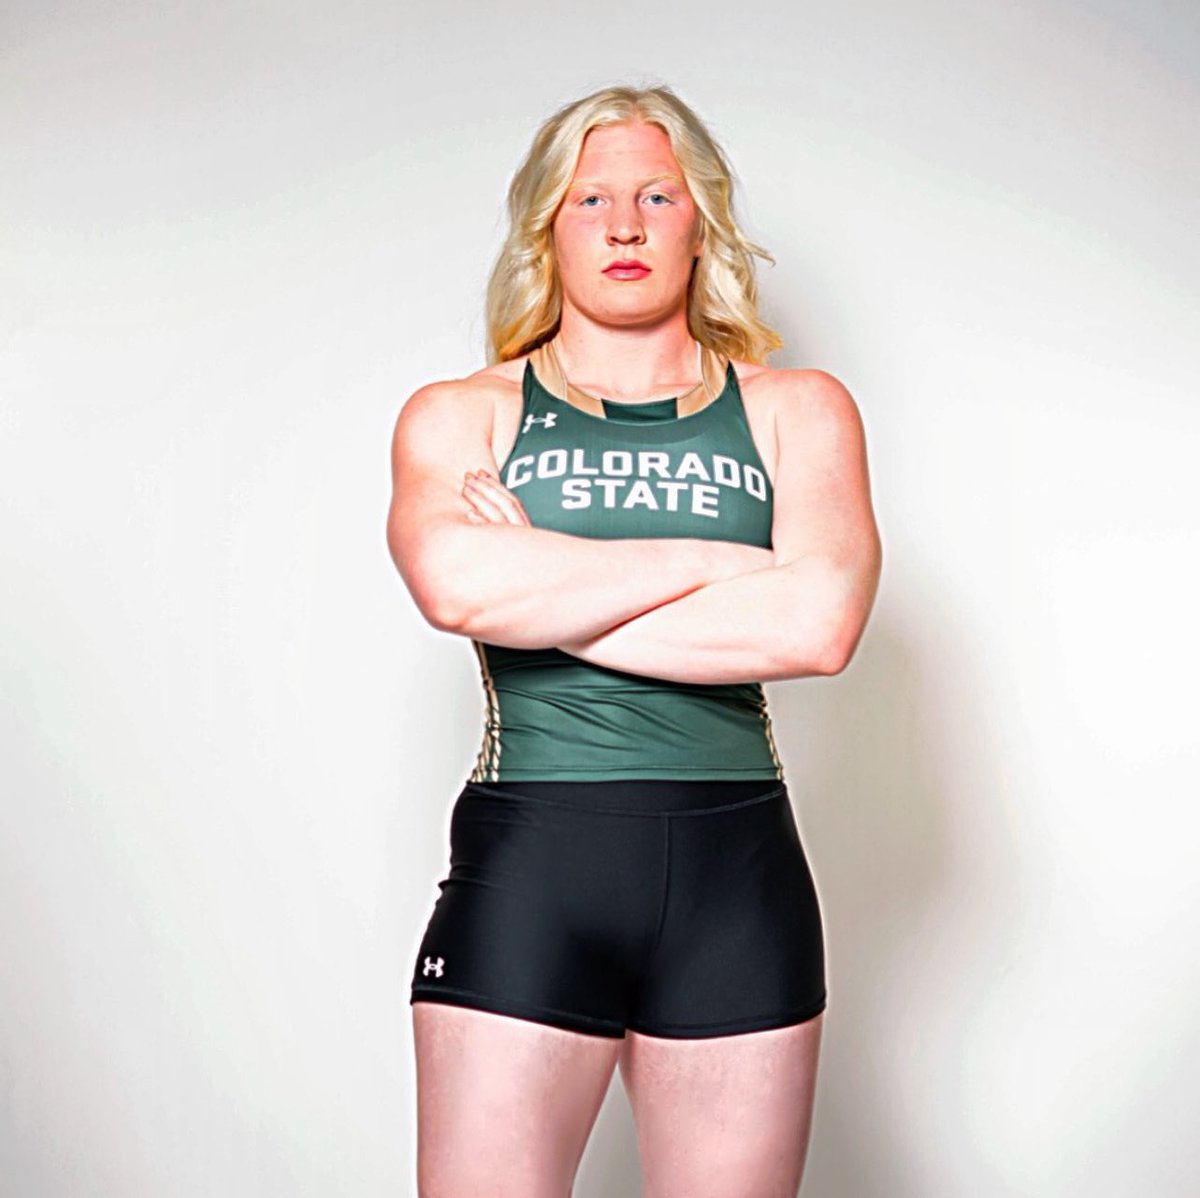 Just discovered that Brock Lesnar’s daughter is a shot putter for Colorado State.  Genetics are undefeated.